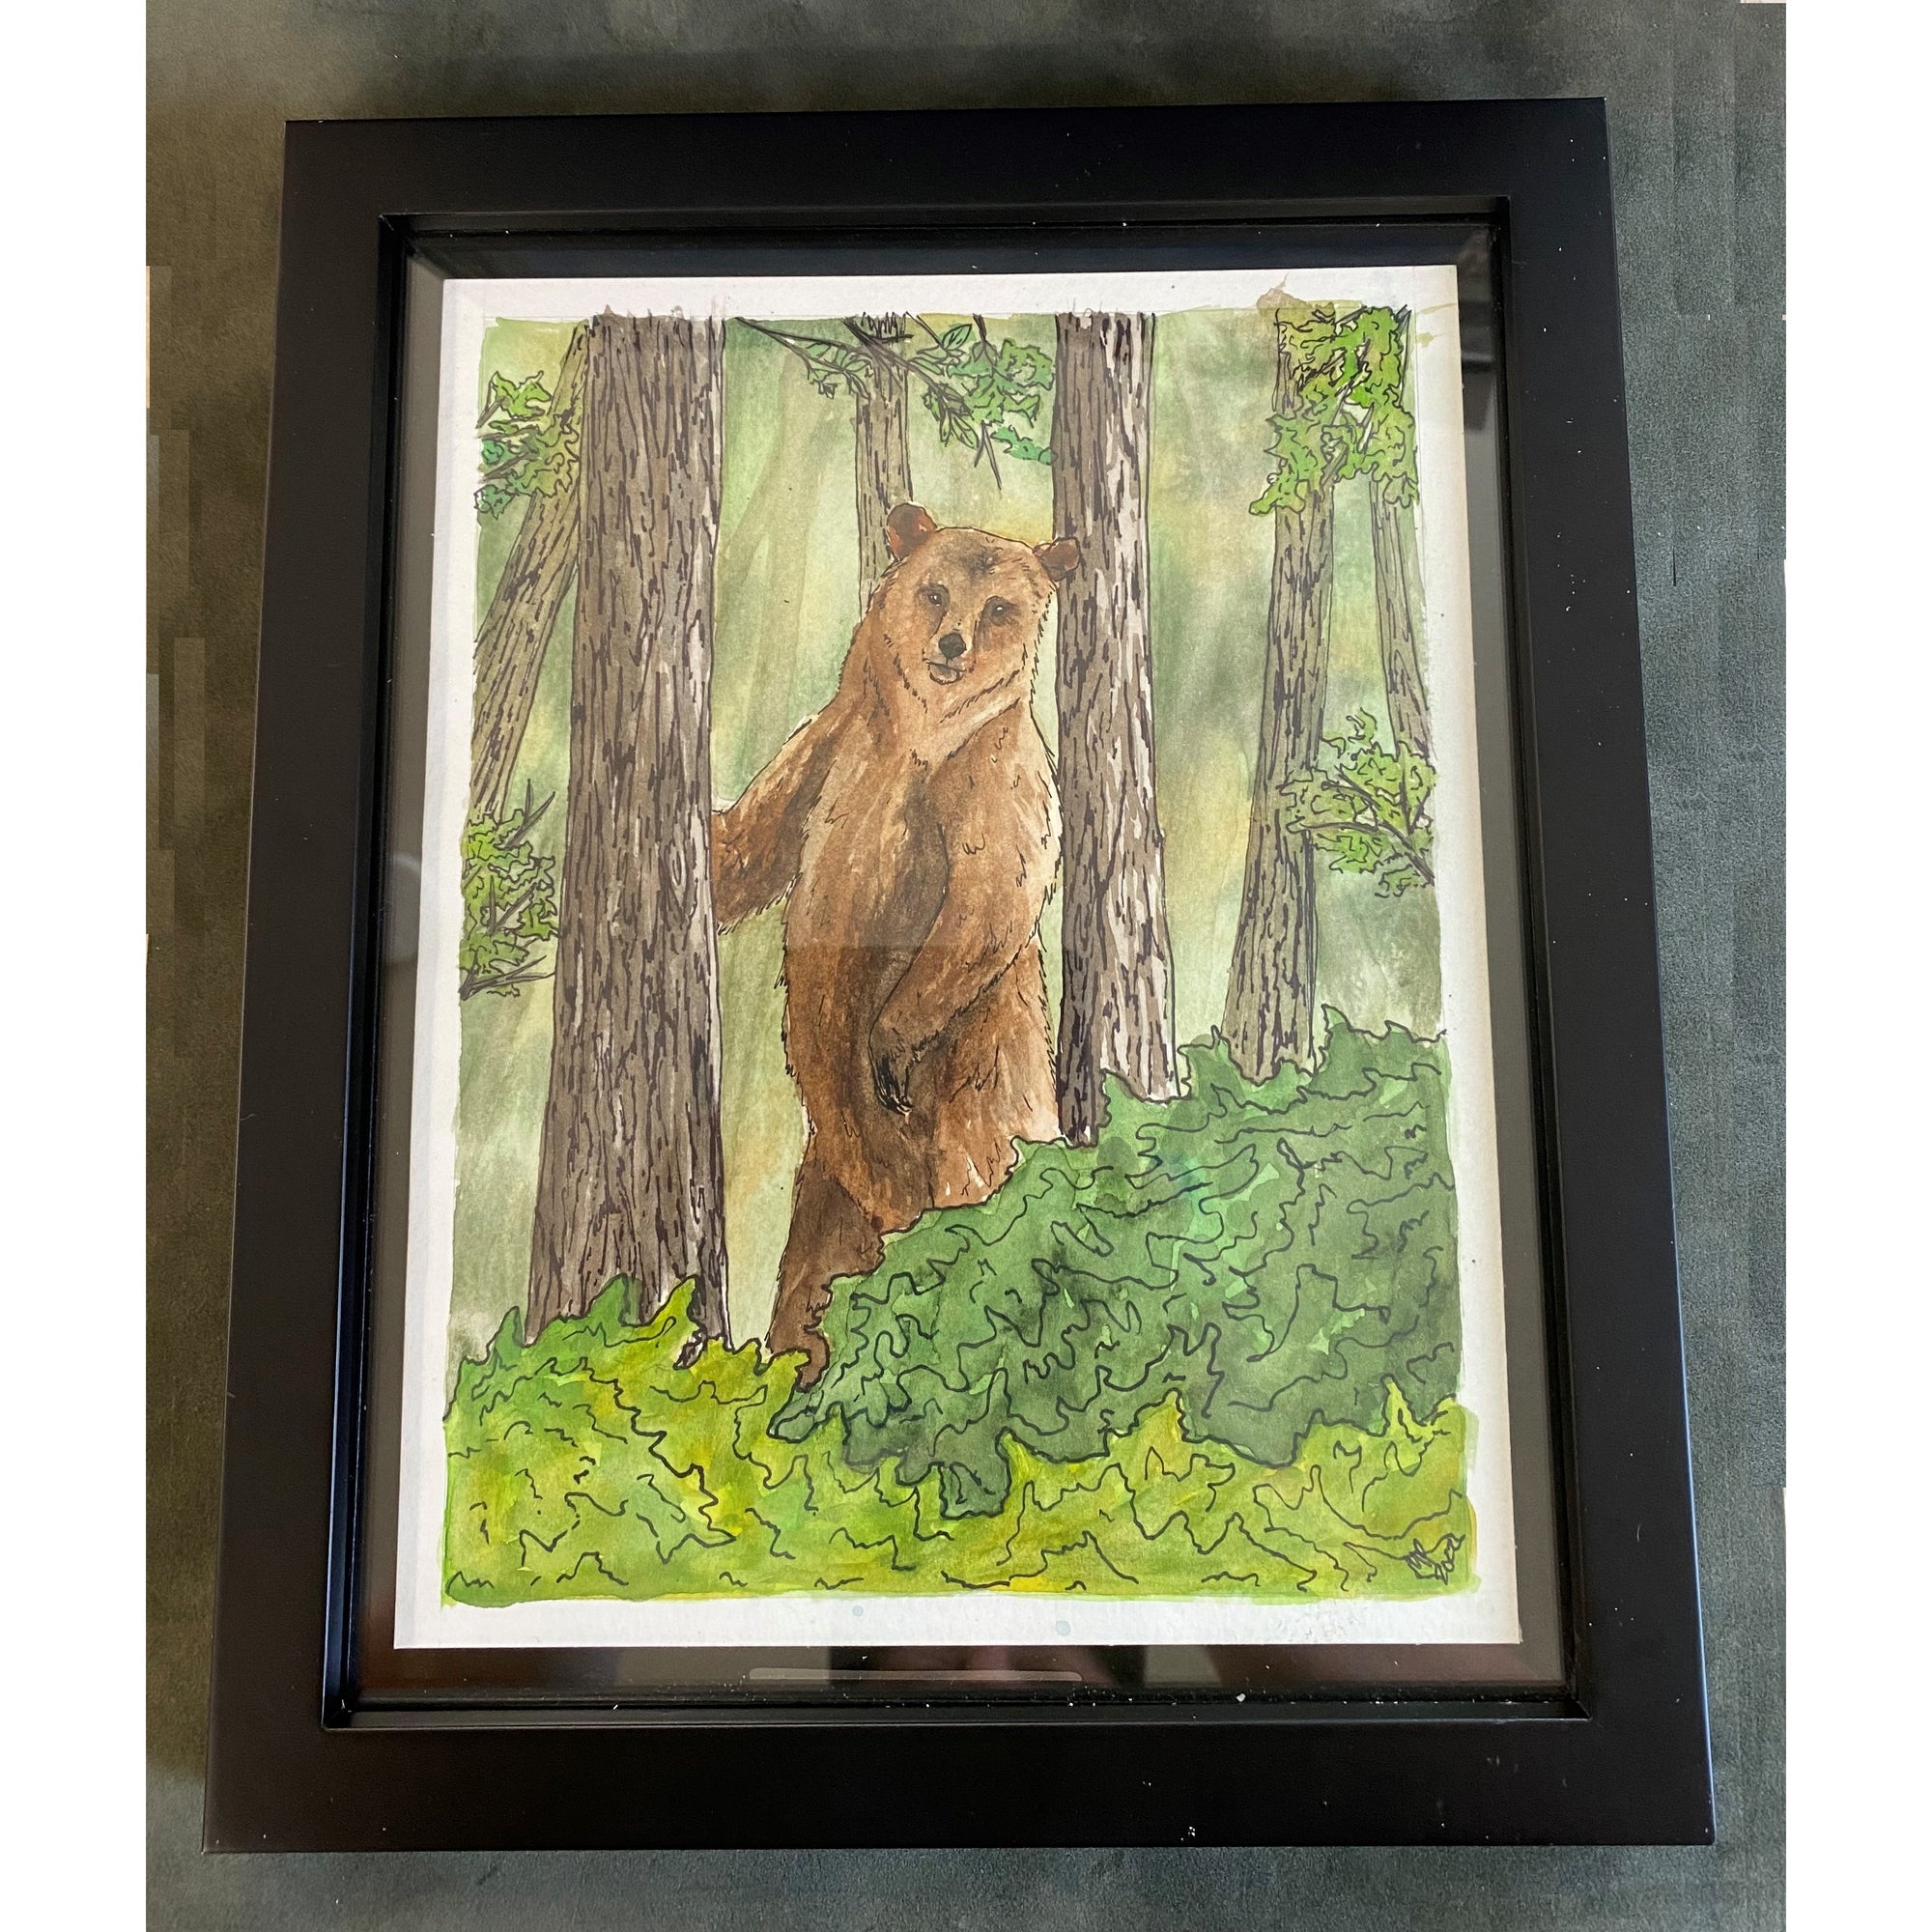 Grizzly Forest Framed Original 8x10